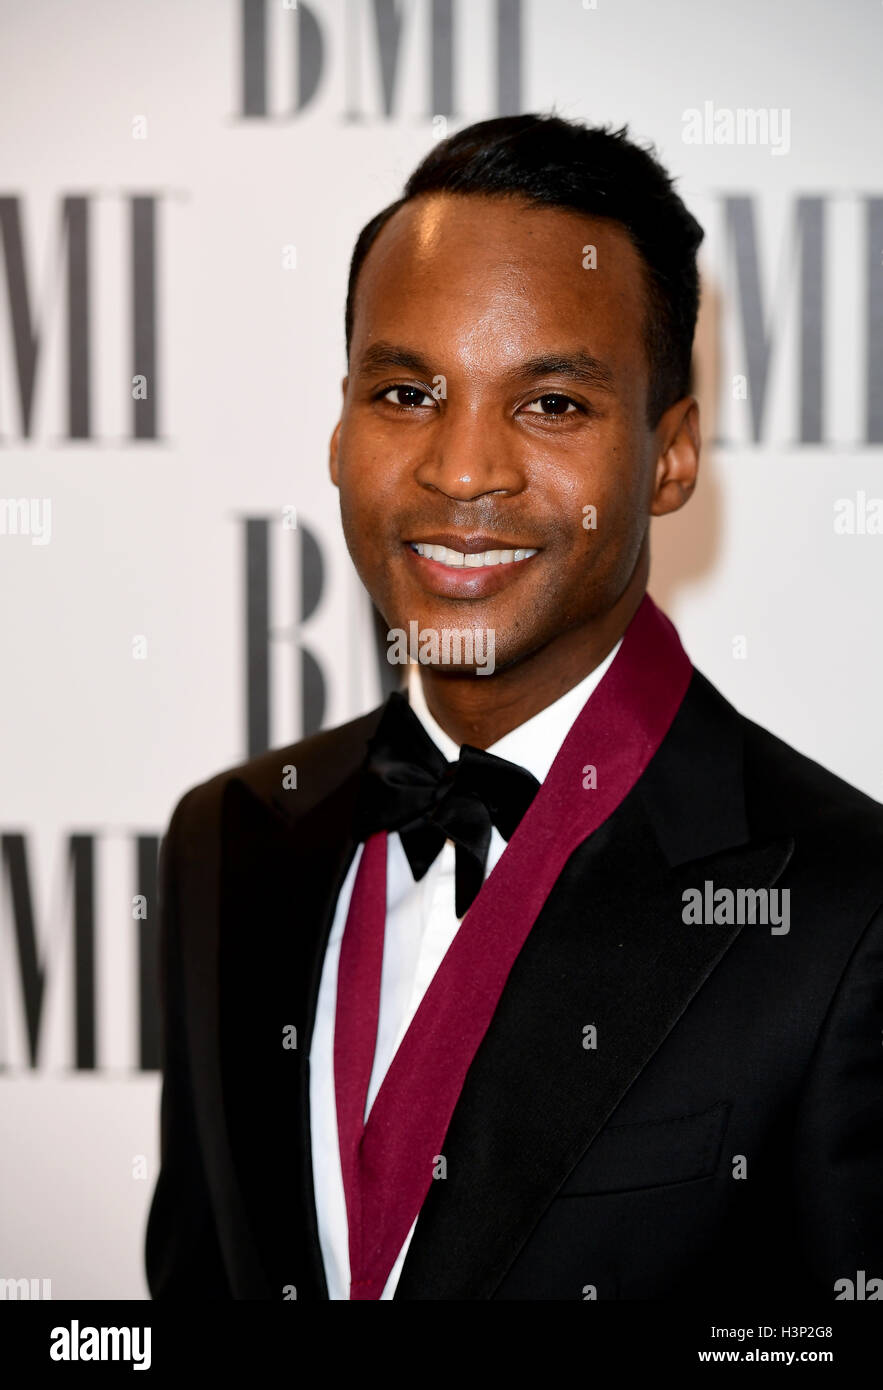 Giorgio Tuinfort attending the BMI London Awards at the Dorchester Hotel, London. PRESS ASSOCIATION Photo. Picture date: Monday 10th October, 2016. Photo credit should read: Ian West/PA Wire. Stock Photo